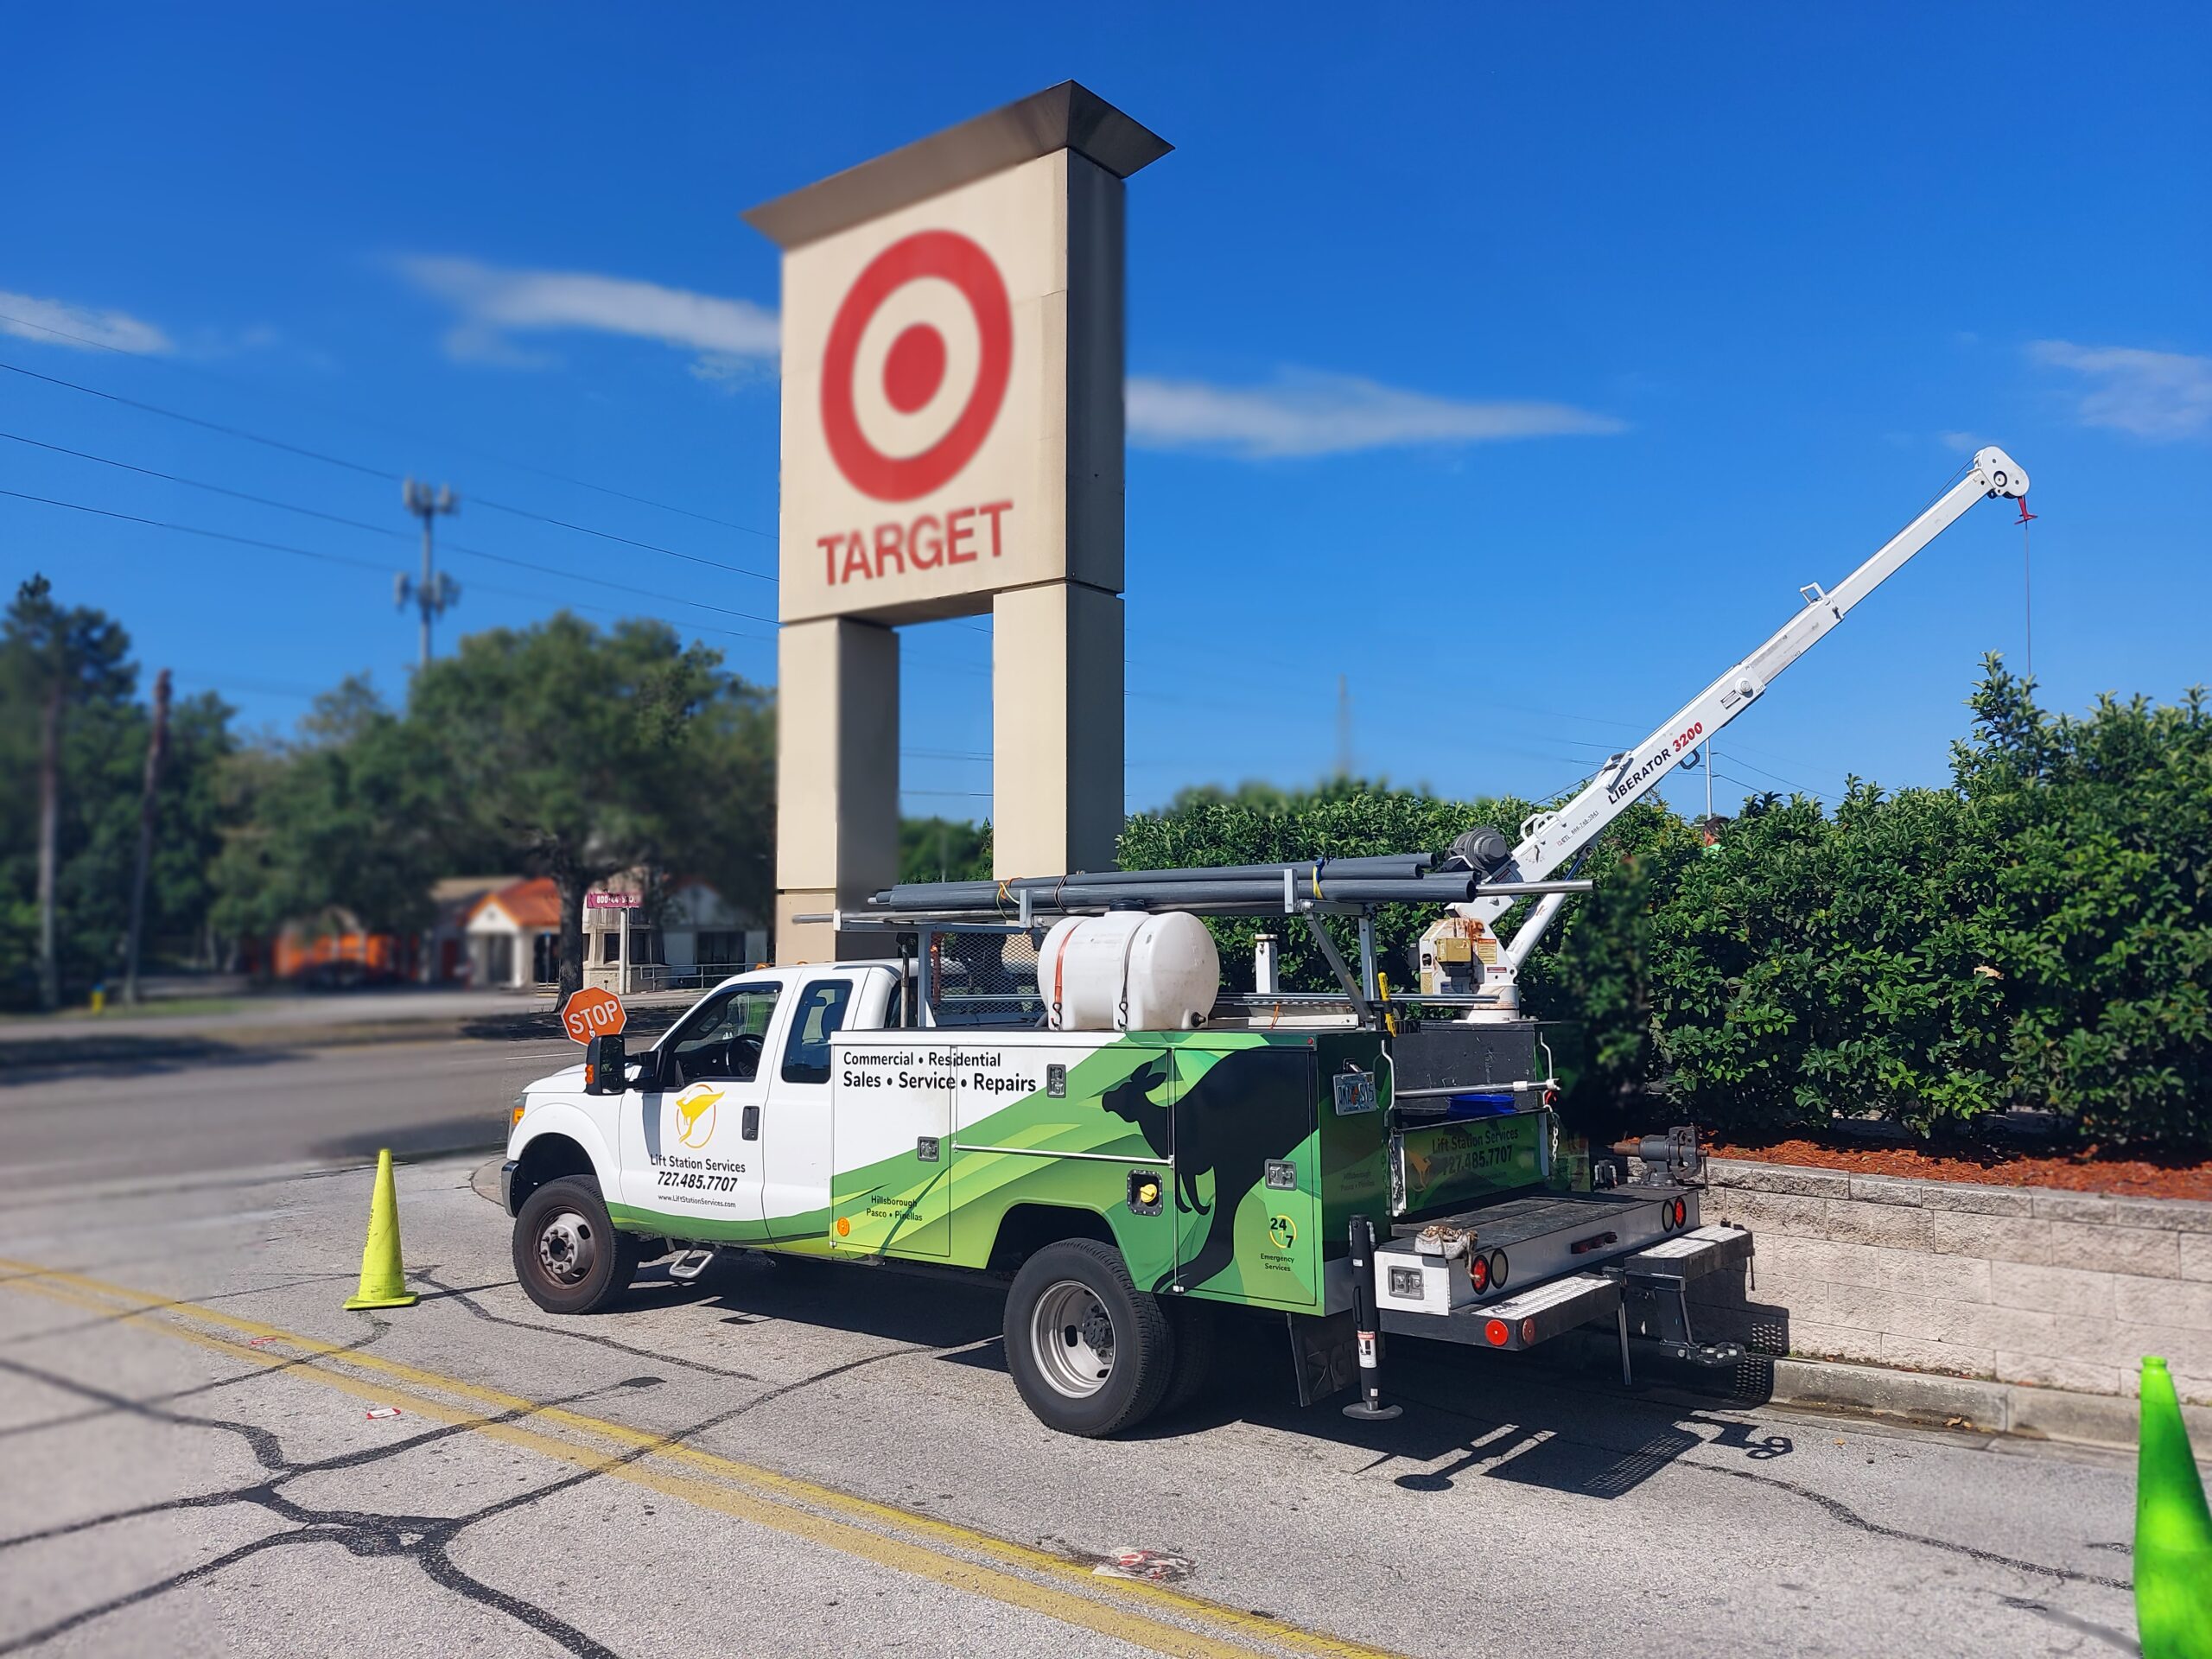 Featured image for “New Pumps Arrive Just In Time For 3rd Blowout of Temporary Bypass at Target in Tampa, FL”